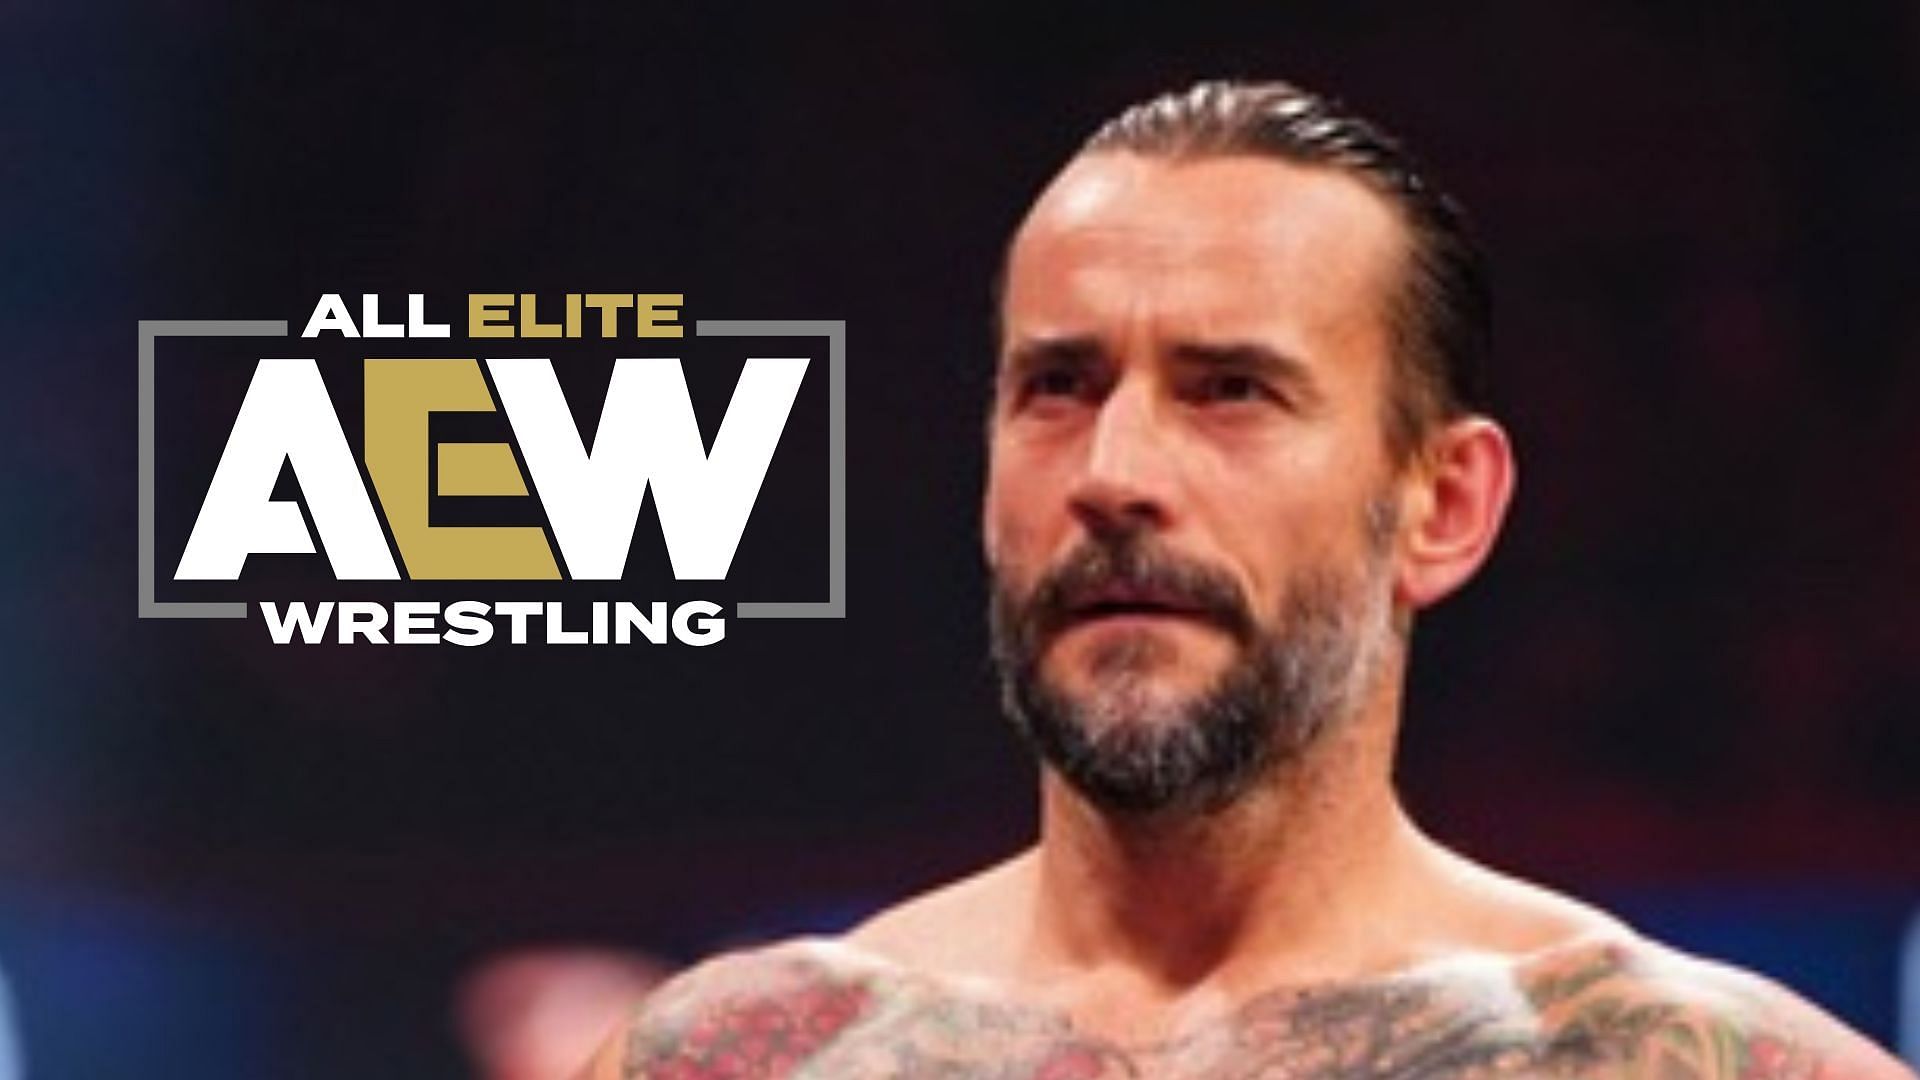 There has been an update on CM Punk